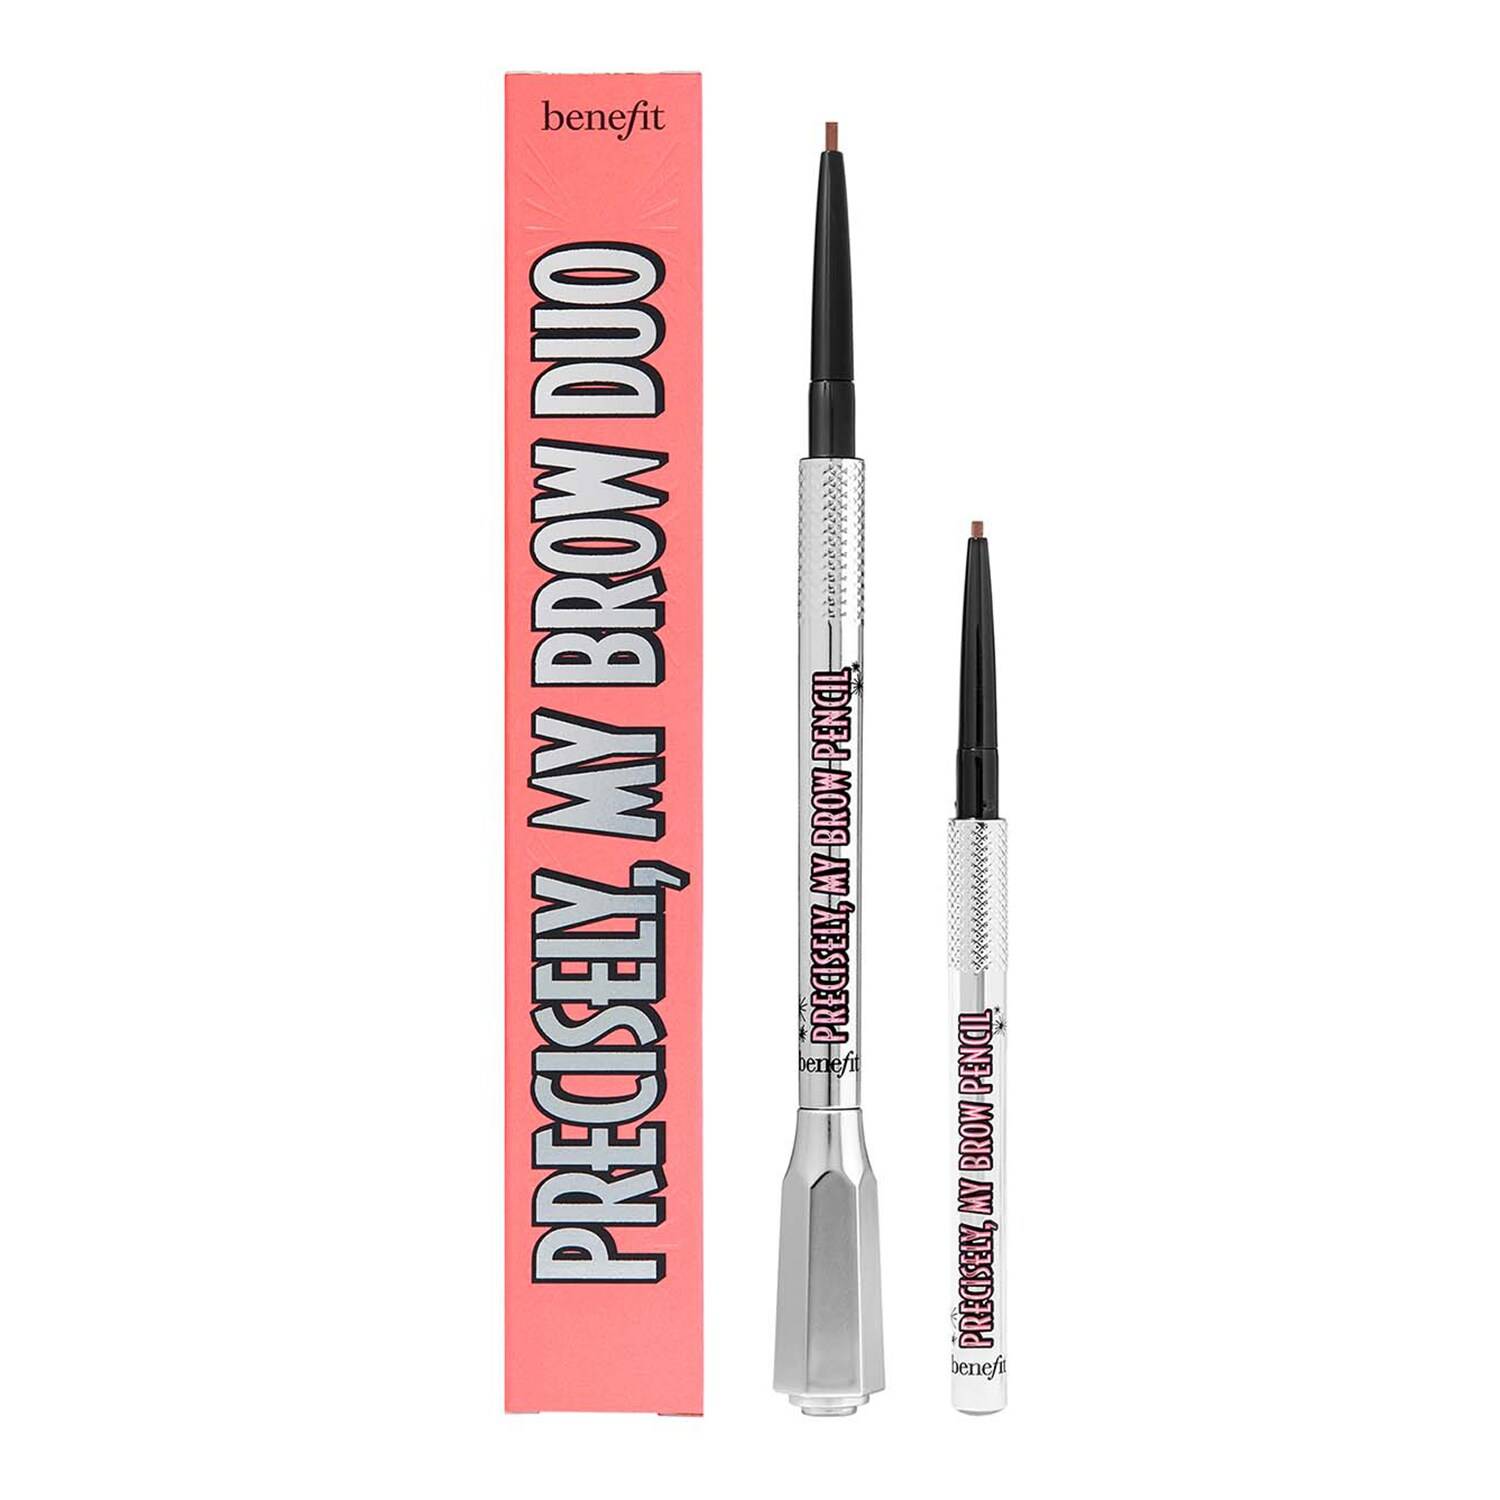 Benefit Cosmetics The Precise Pair Precisely My Brow Pencil Shade 3.5 Duo Shade 3.5